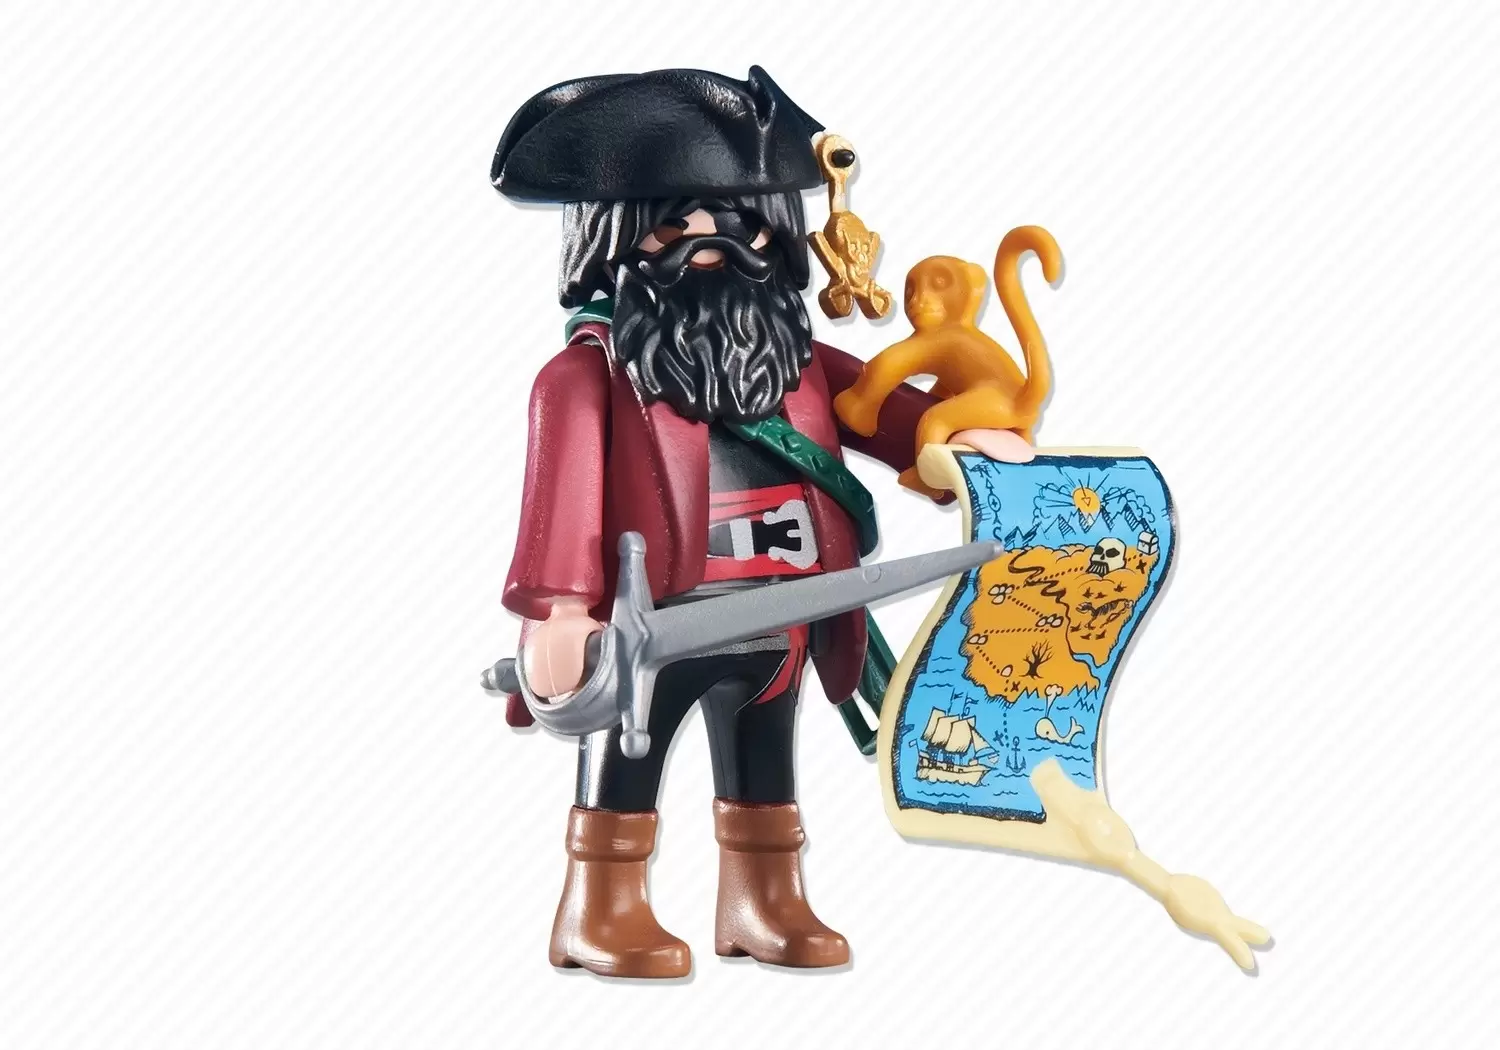 Pirate Captain with Map - Pirate Playmobil 6433